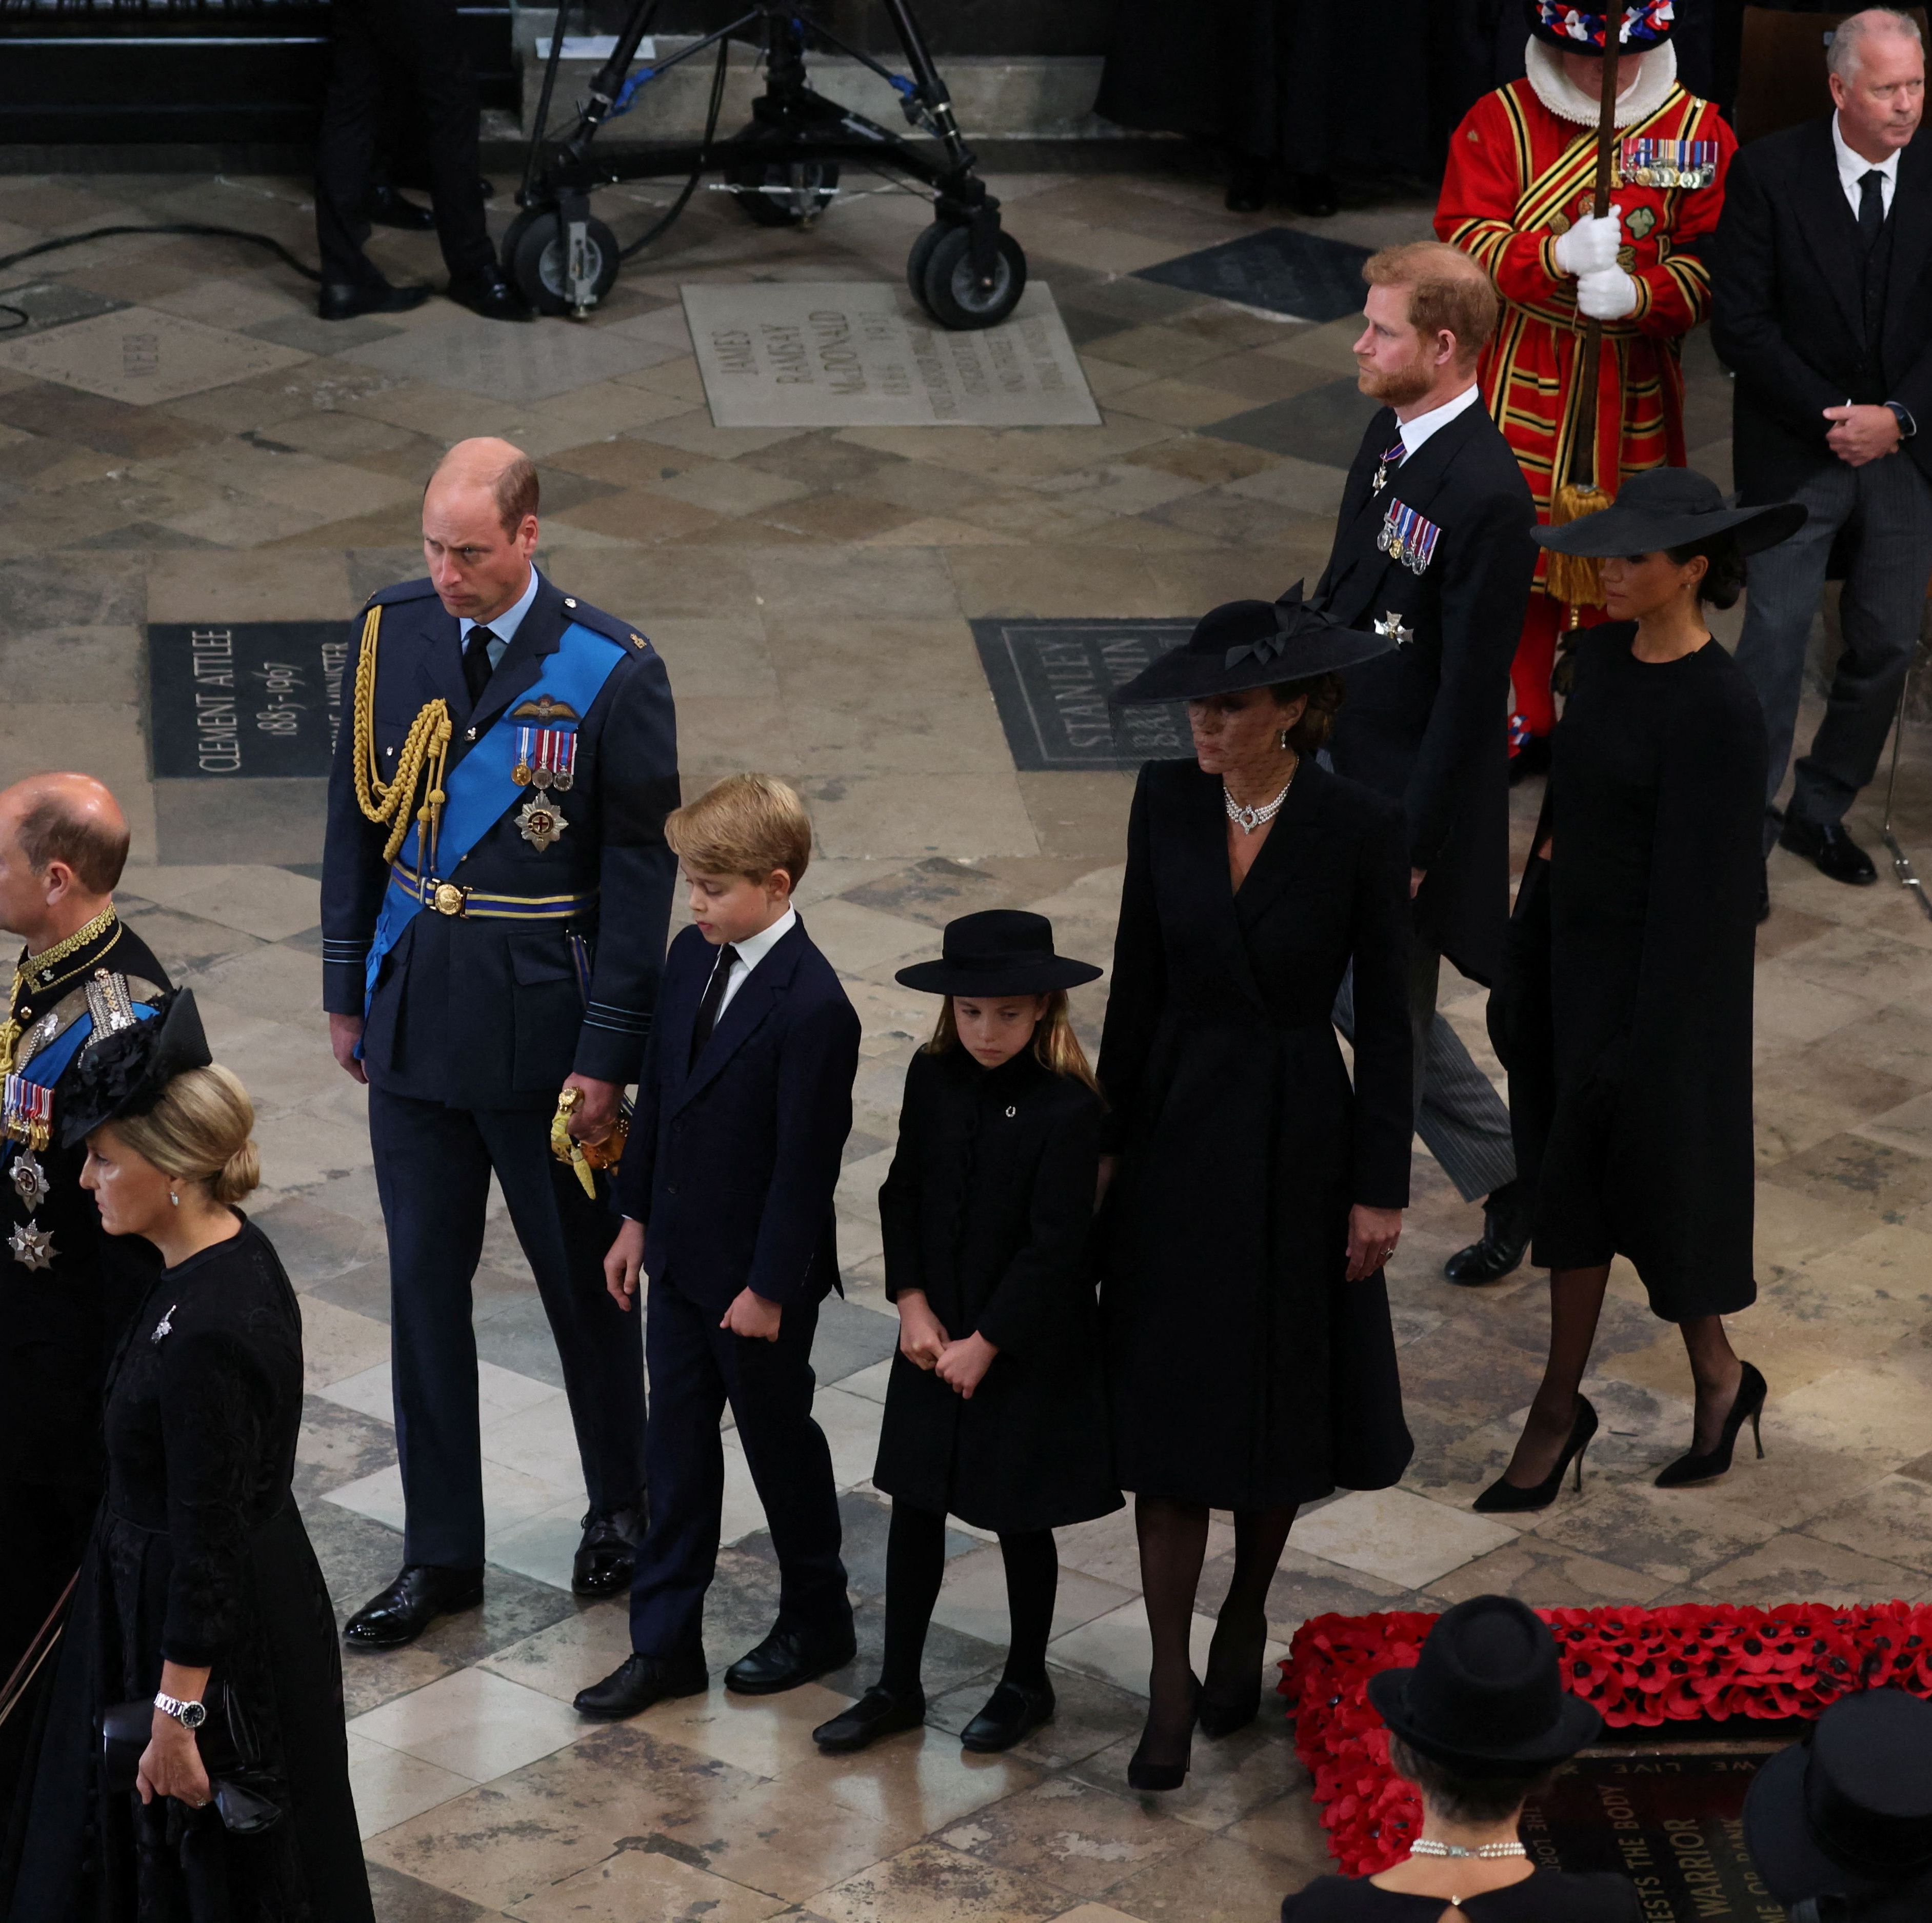 The Internet Is Claiming Prince Harry, Meghan Markle Were Snubbed at Queen's Funeral